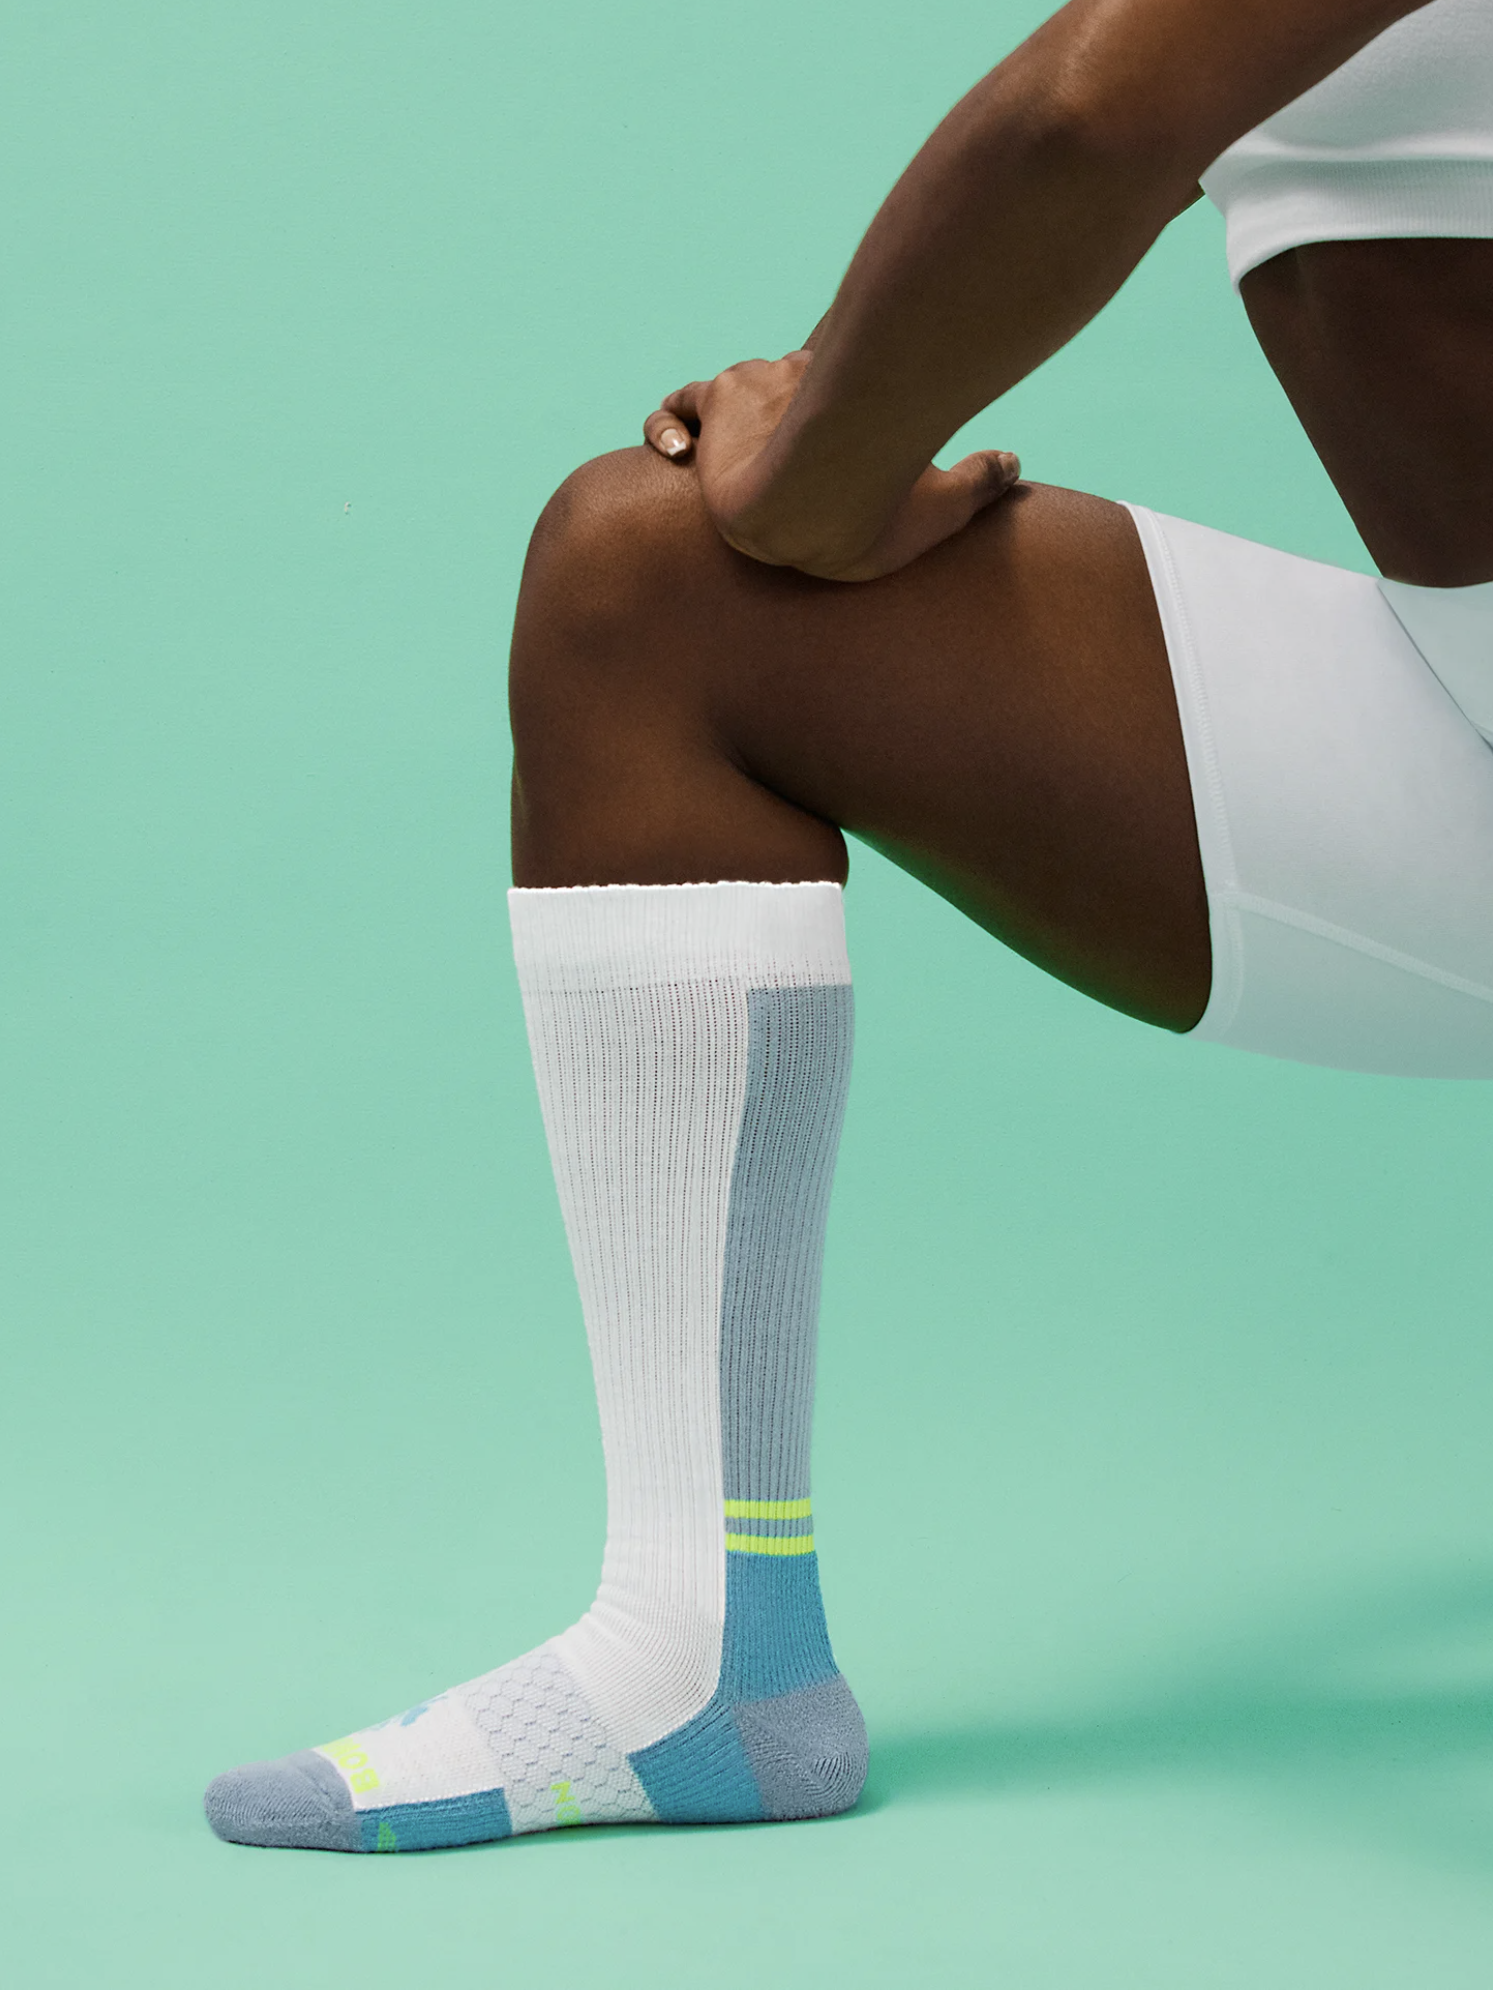 A person wearing white sportswear and a knee-high compression sock with a colored heel and toe, stretching the calf muscle against a green background.